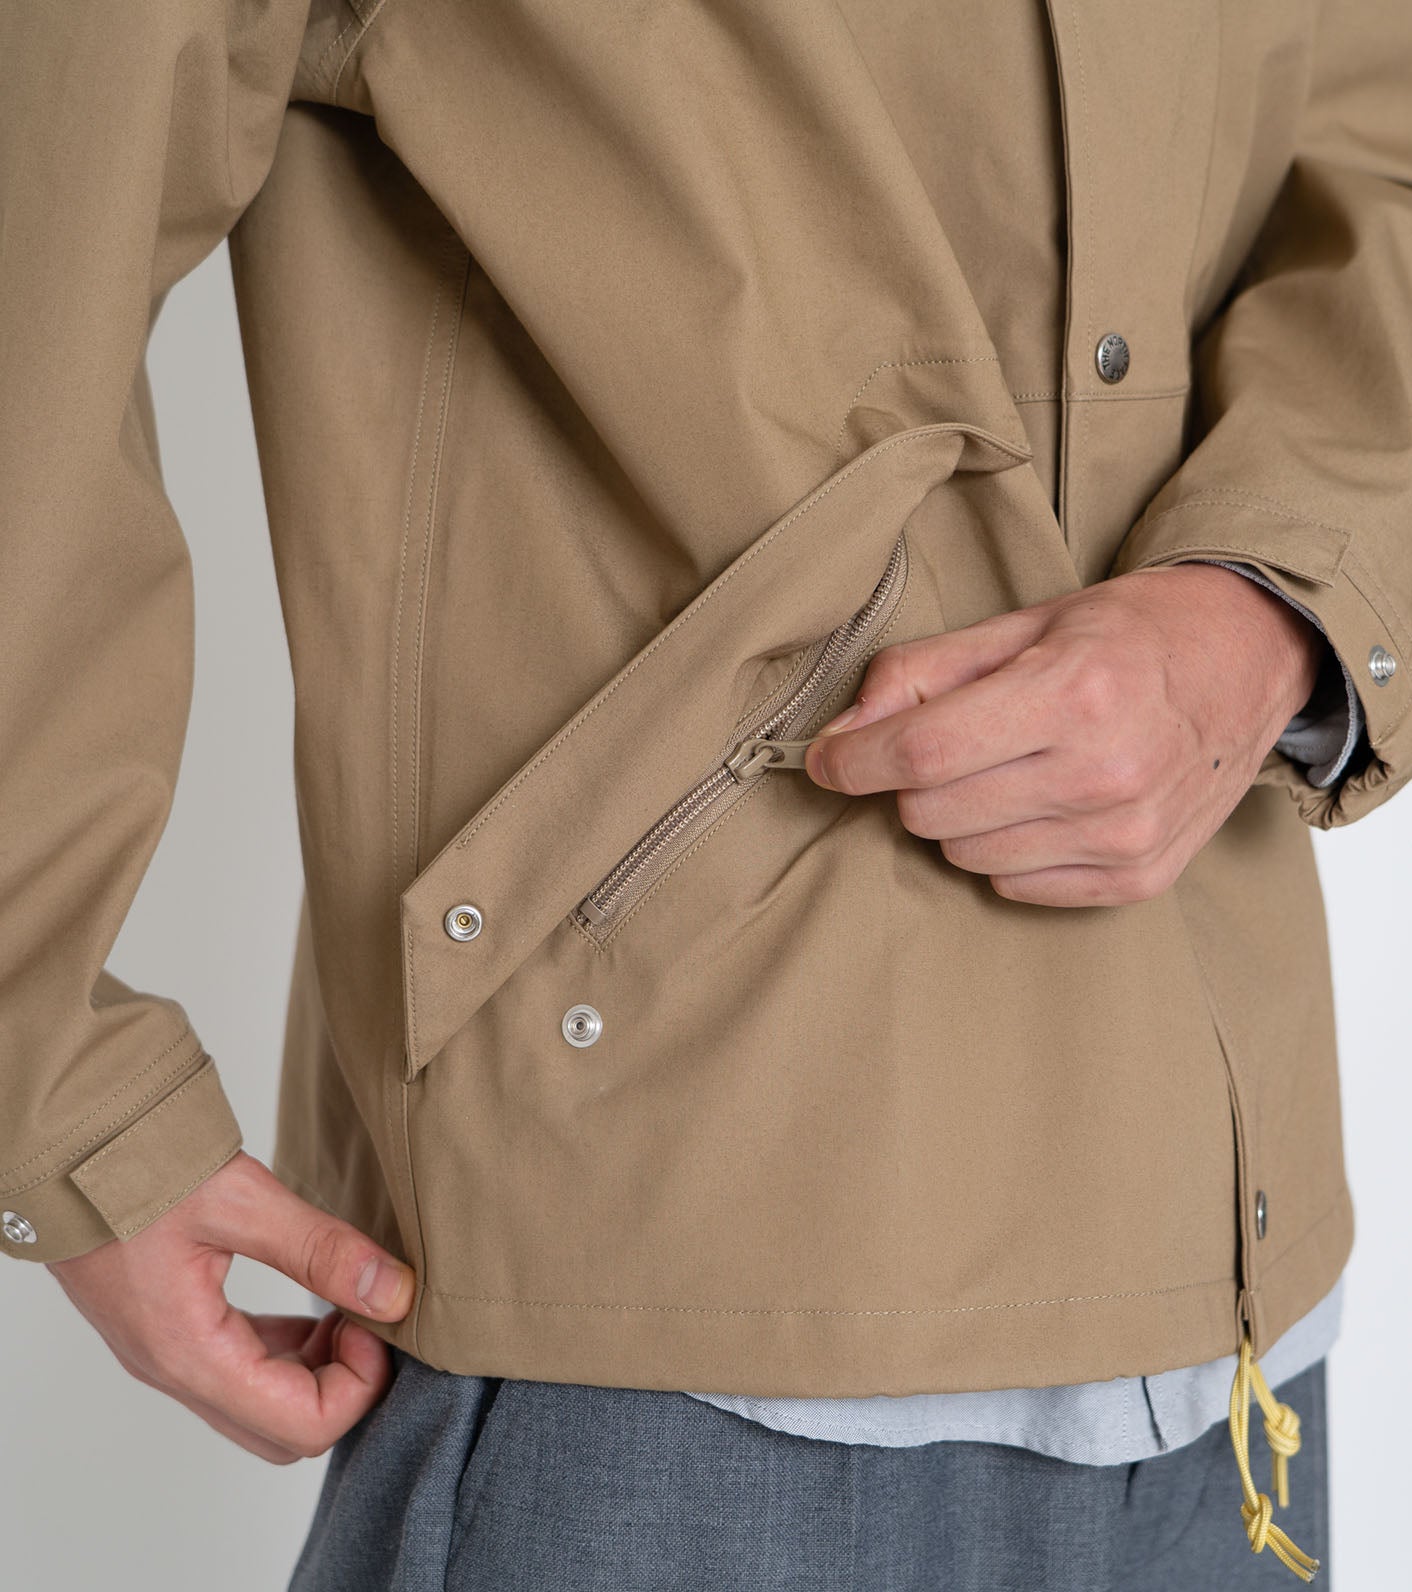 THE NORTH FACE PURPLE LABEL GORE-TEX Field Jacket – unexpected store